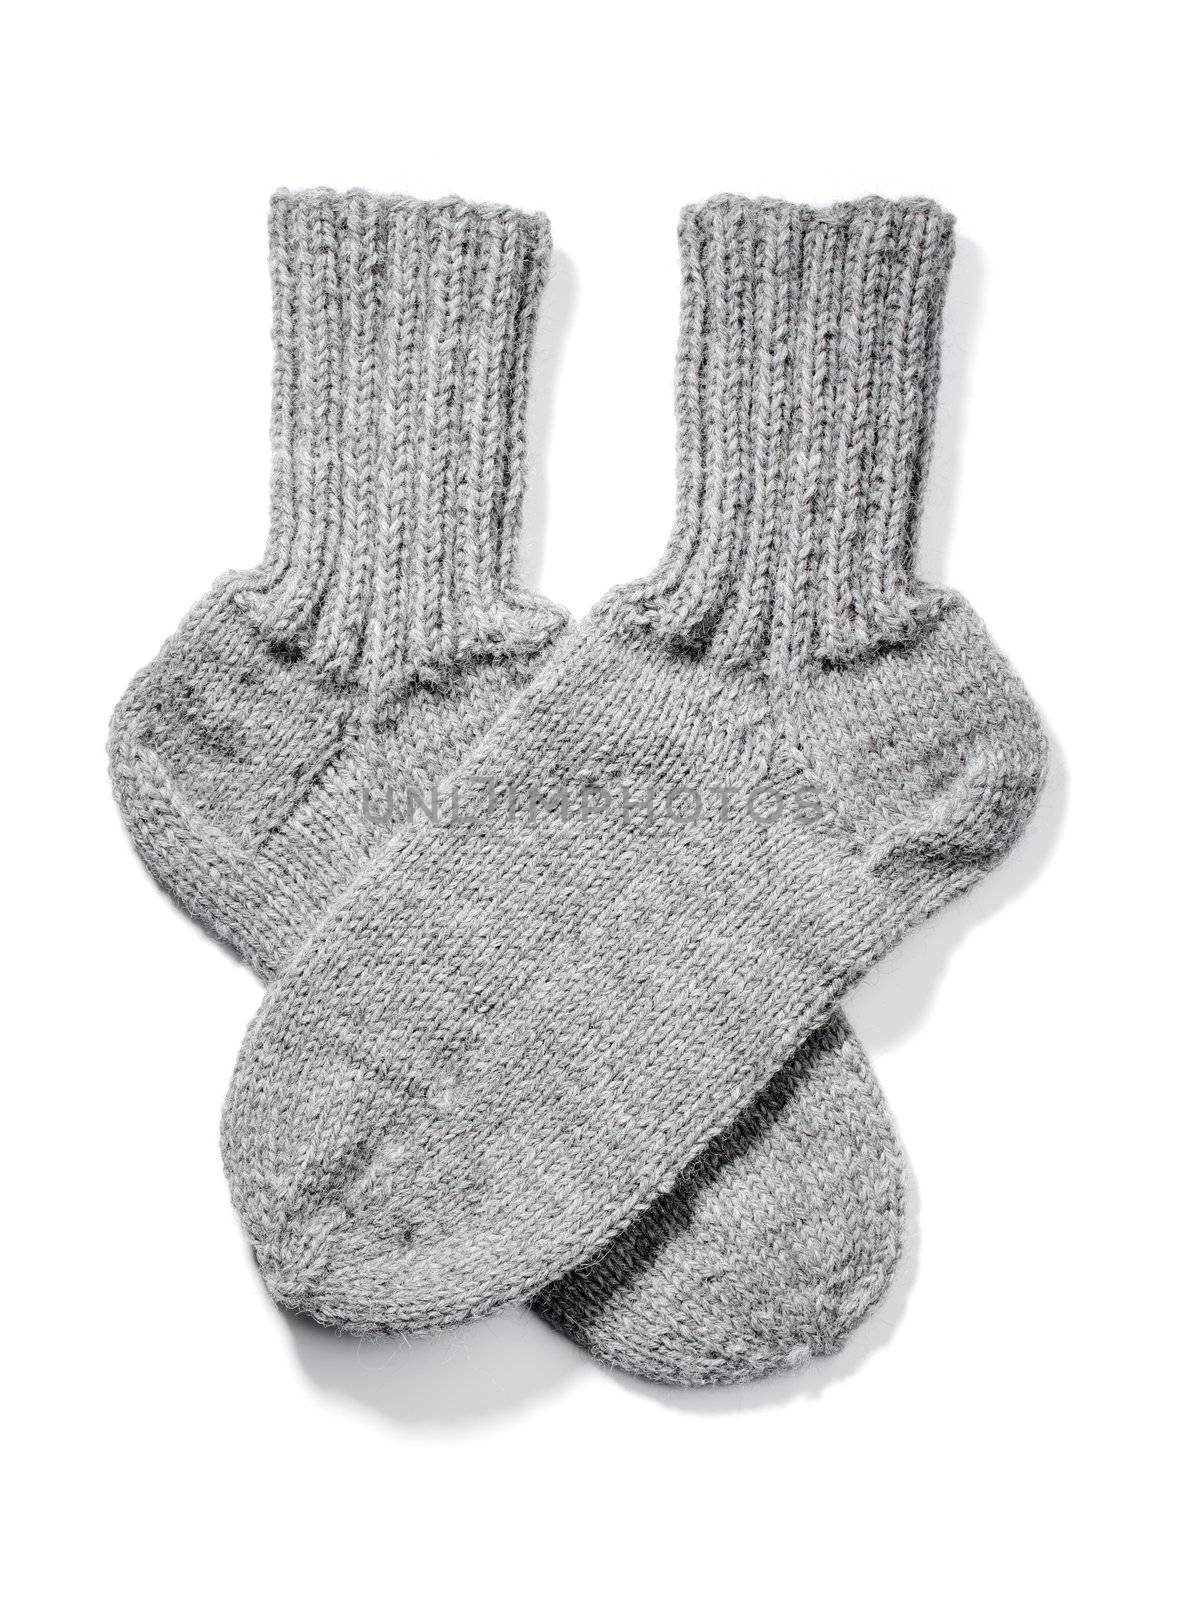 Hand-knitted warm wool socks isolated on white with natural shadows.